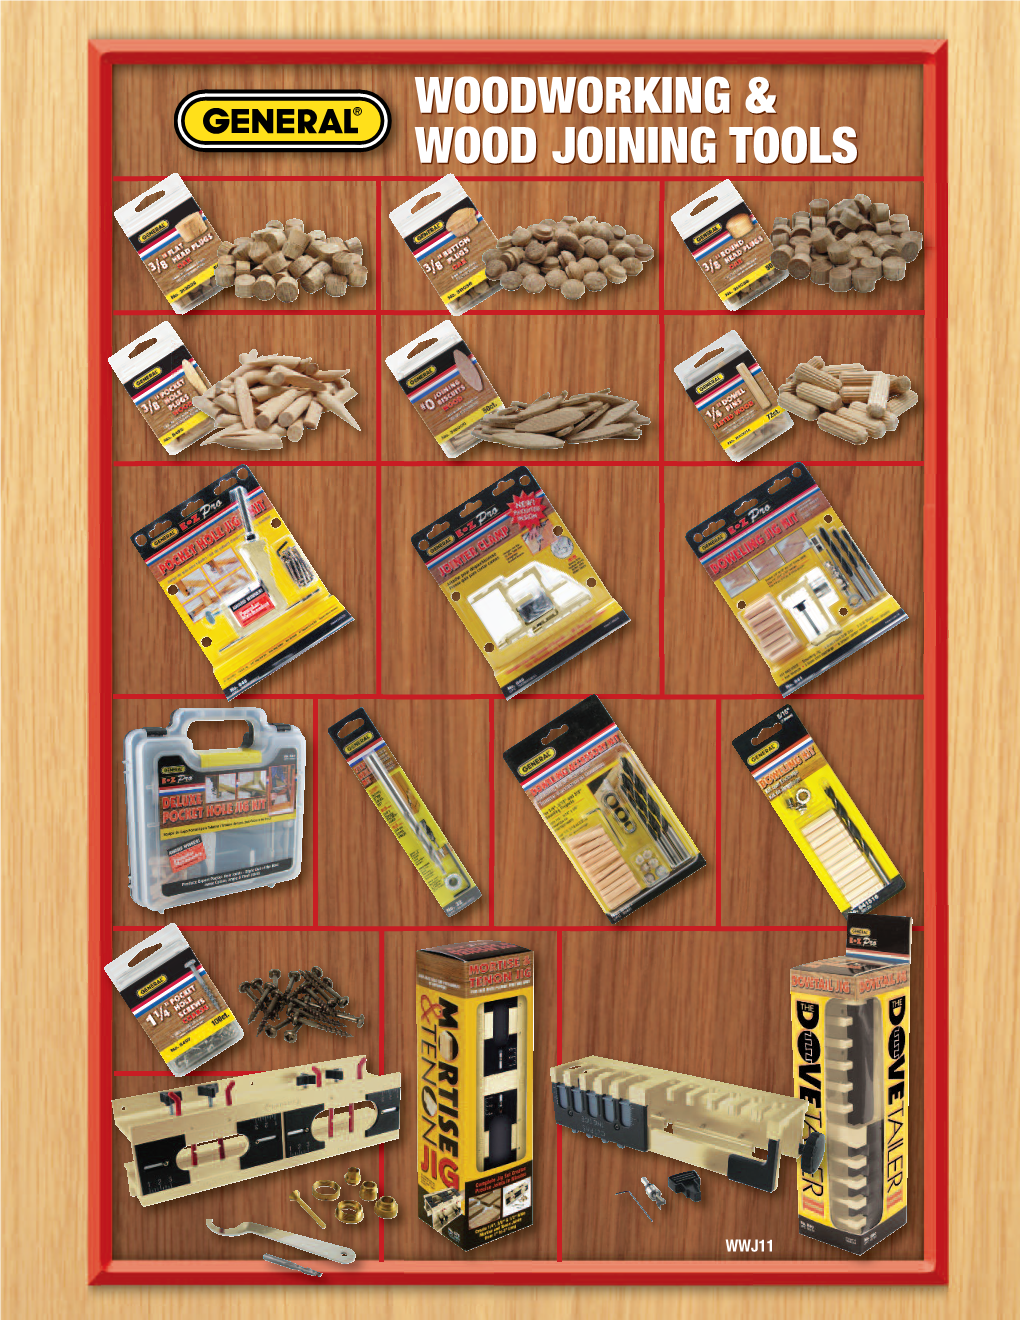 Woodworking & Wood Joining Tools